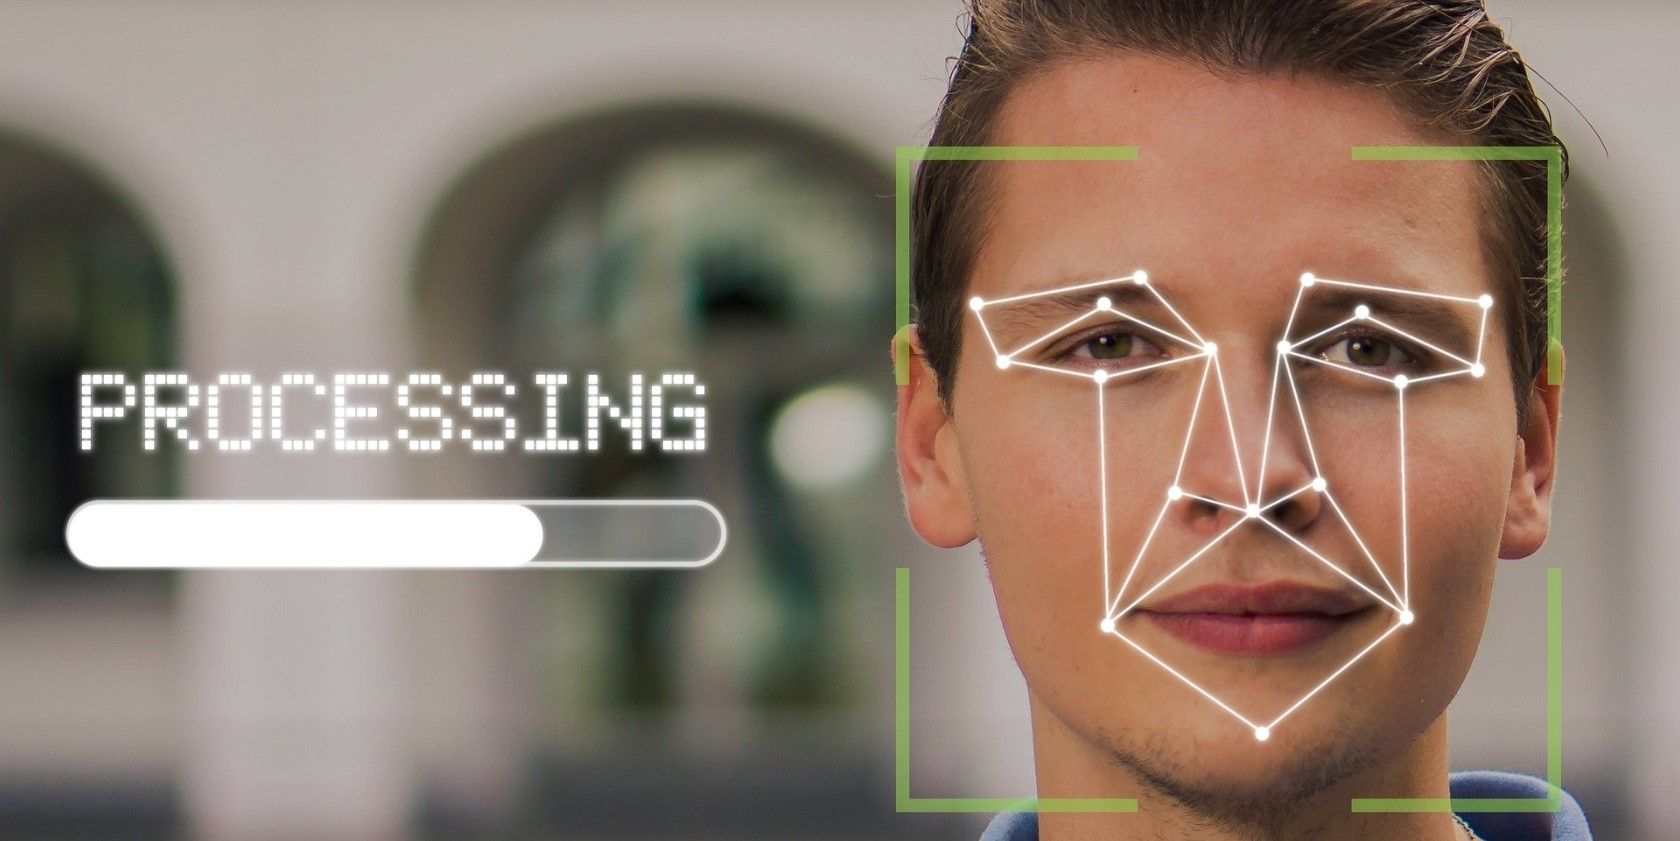 A Man's Facial Recognition Processing by AI